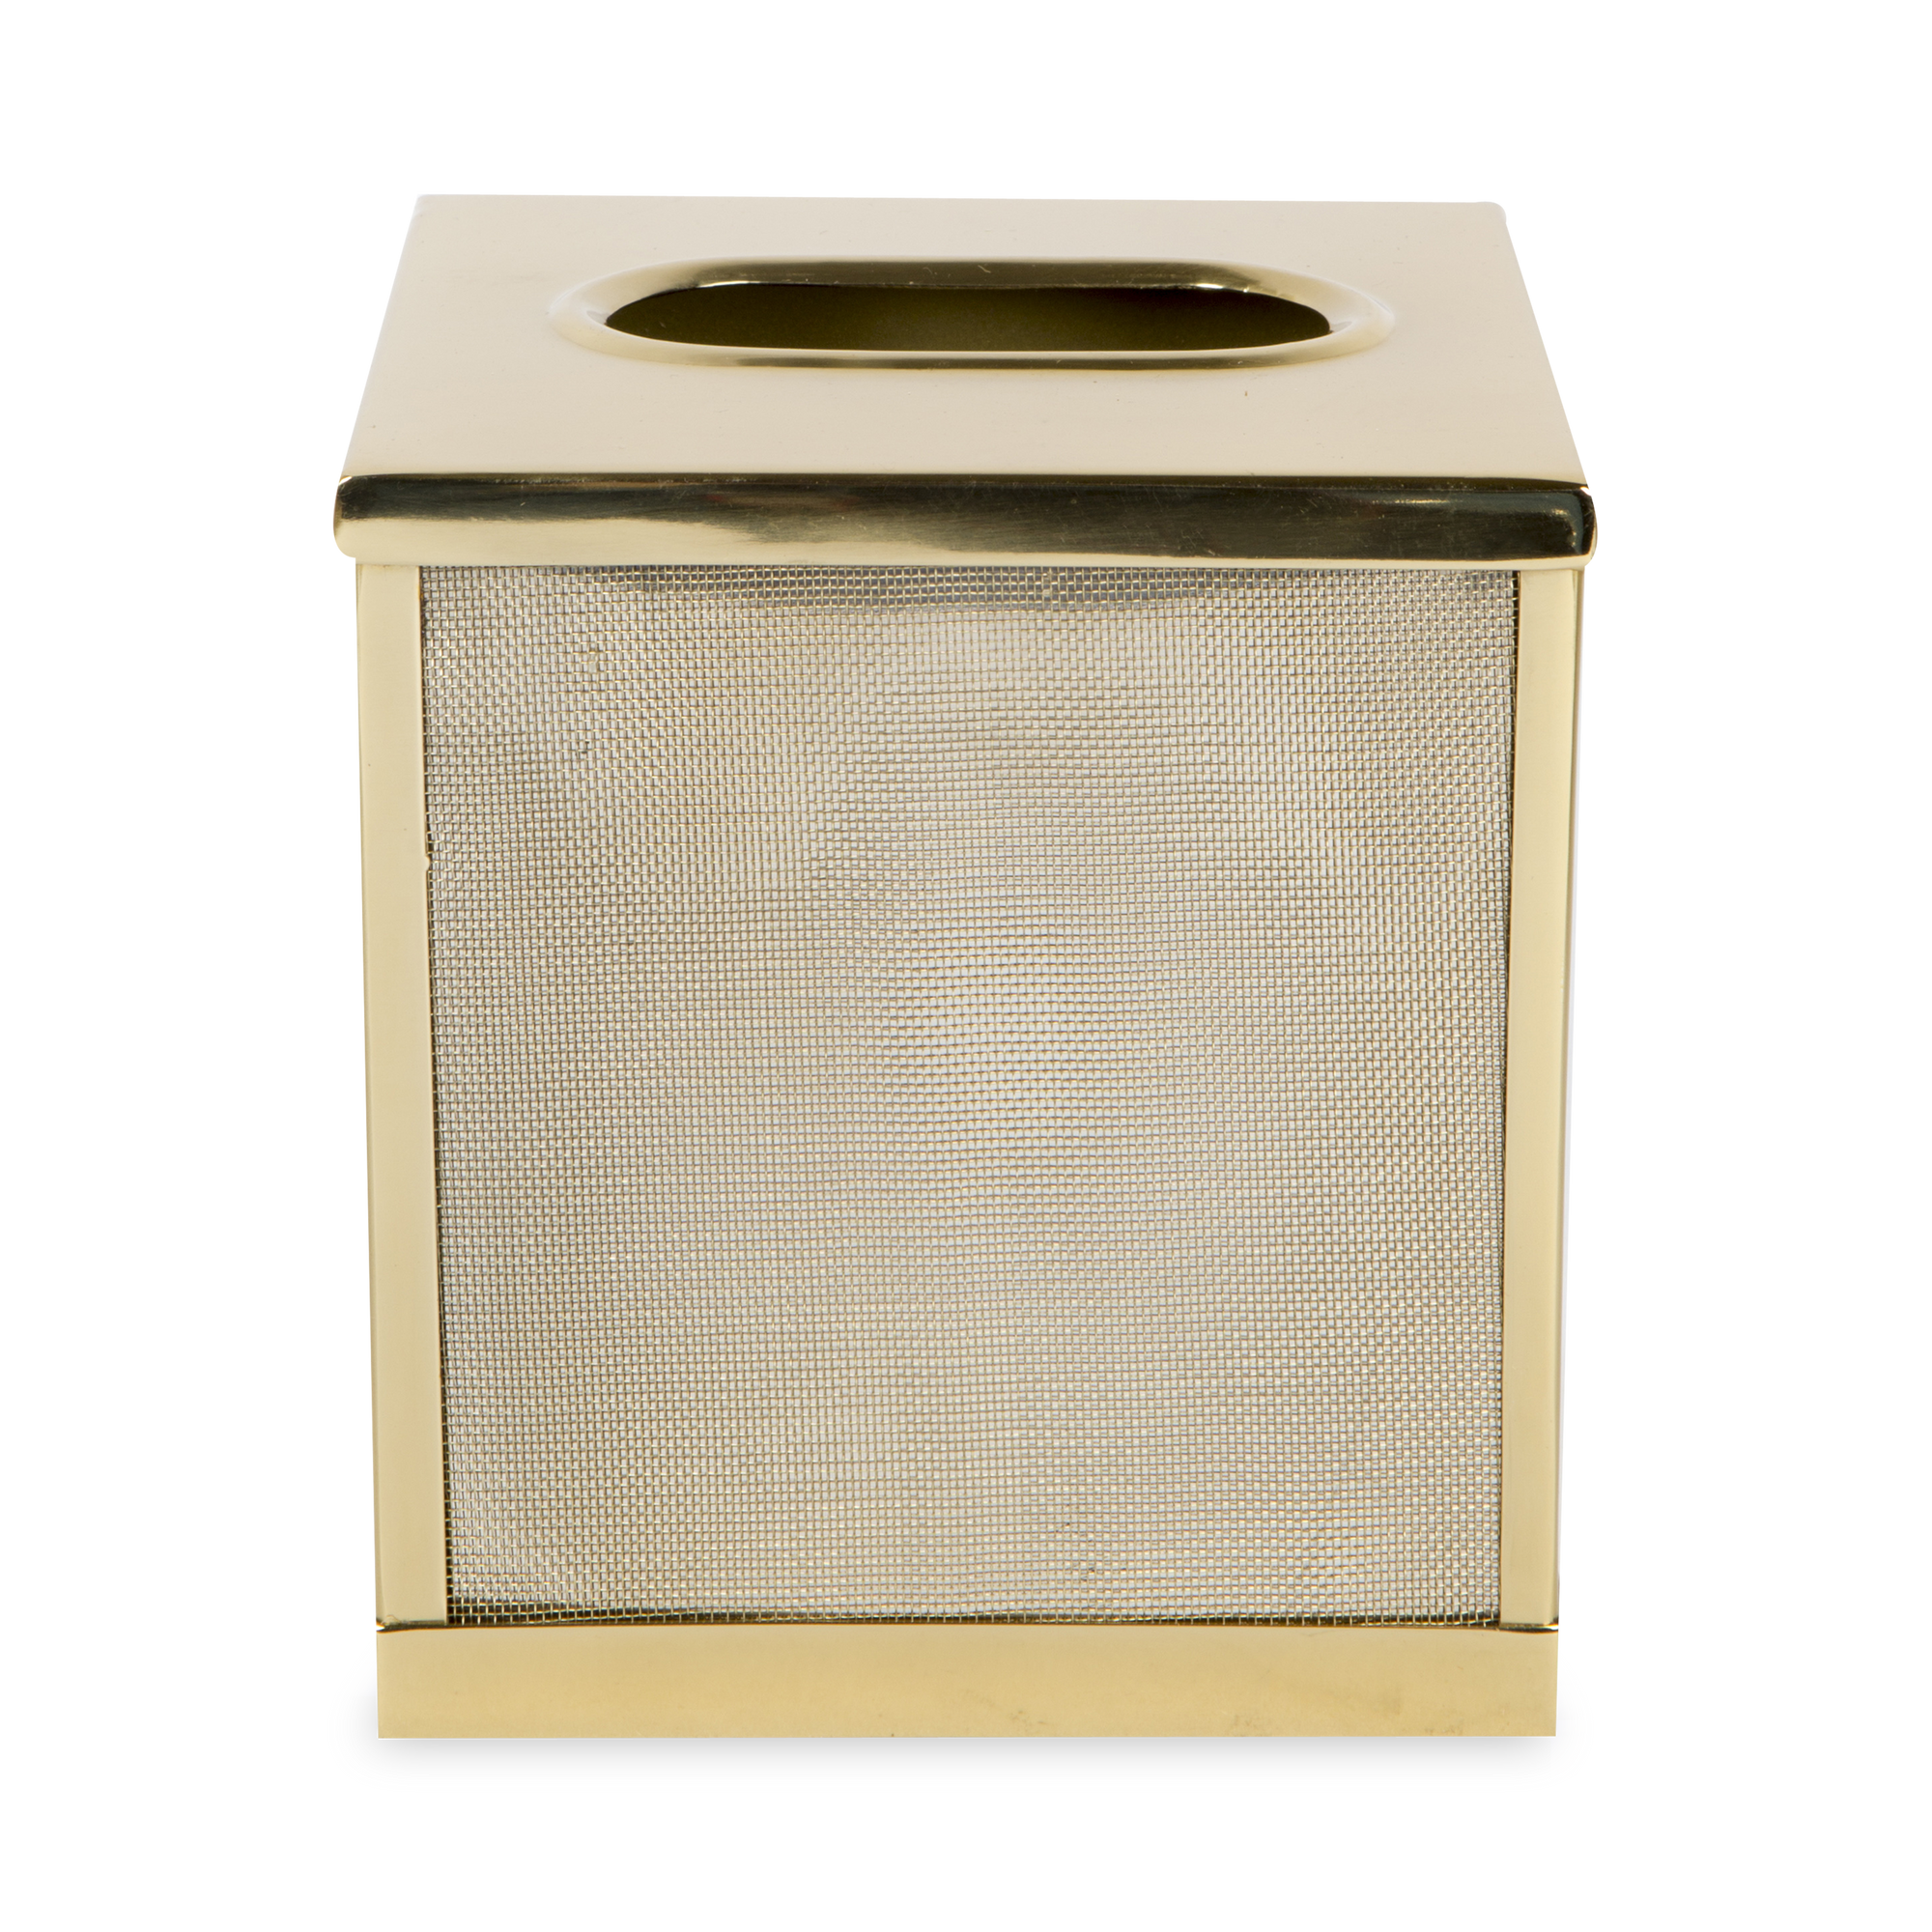 Crafted from steel, our Parker Collection features the elegance of fine metal mesh with a two-tone brass/bronze finish.